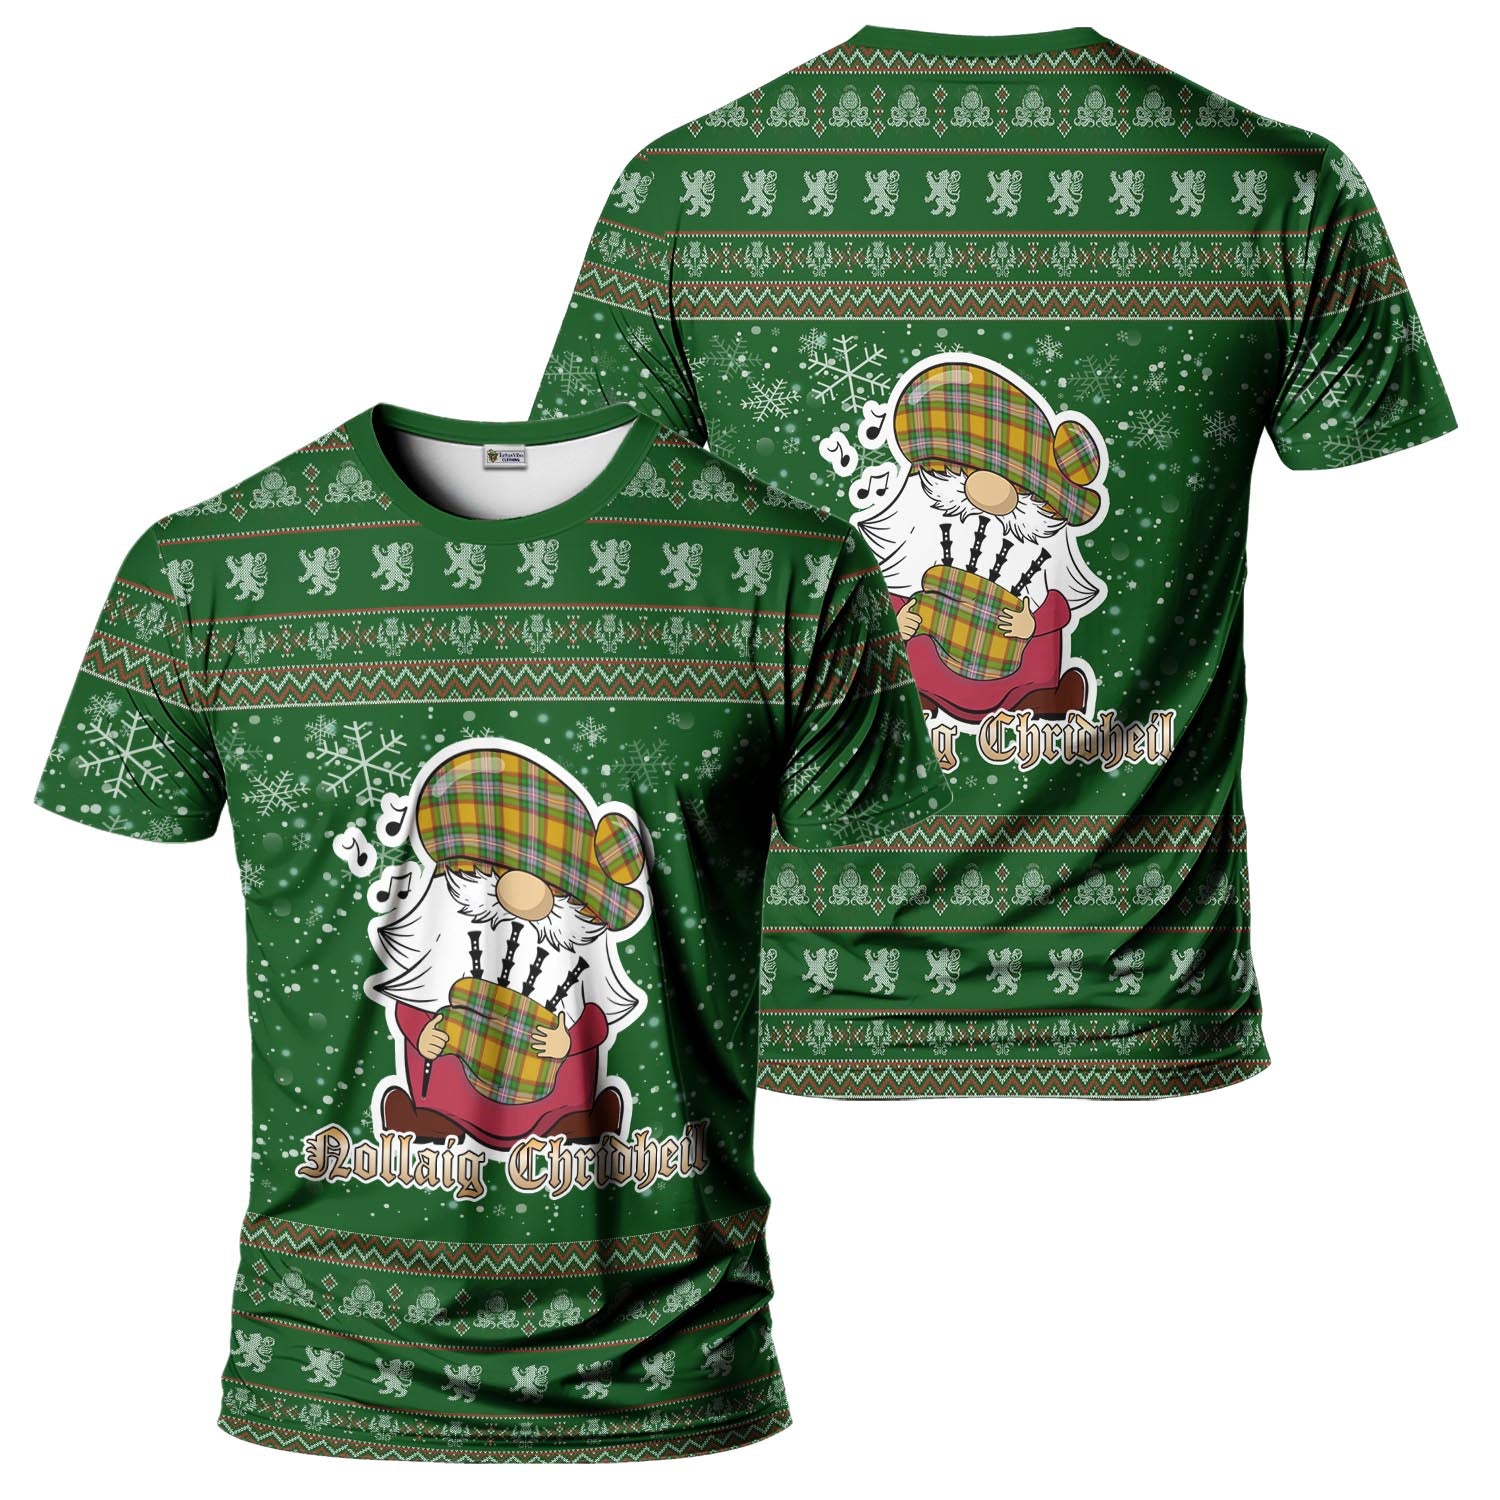 Essex County Canada Clan Christmas Family T-Shirt with Funny Gnome Playing Bagpipes Men's Shirt Green - Tartanvibesclothing